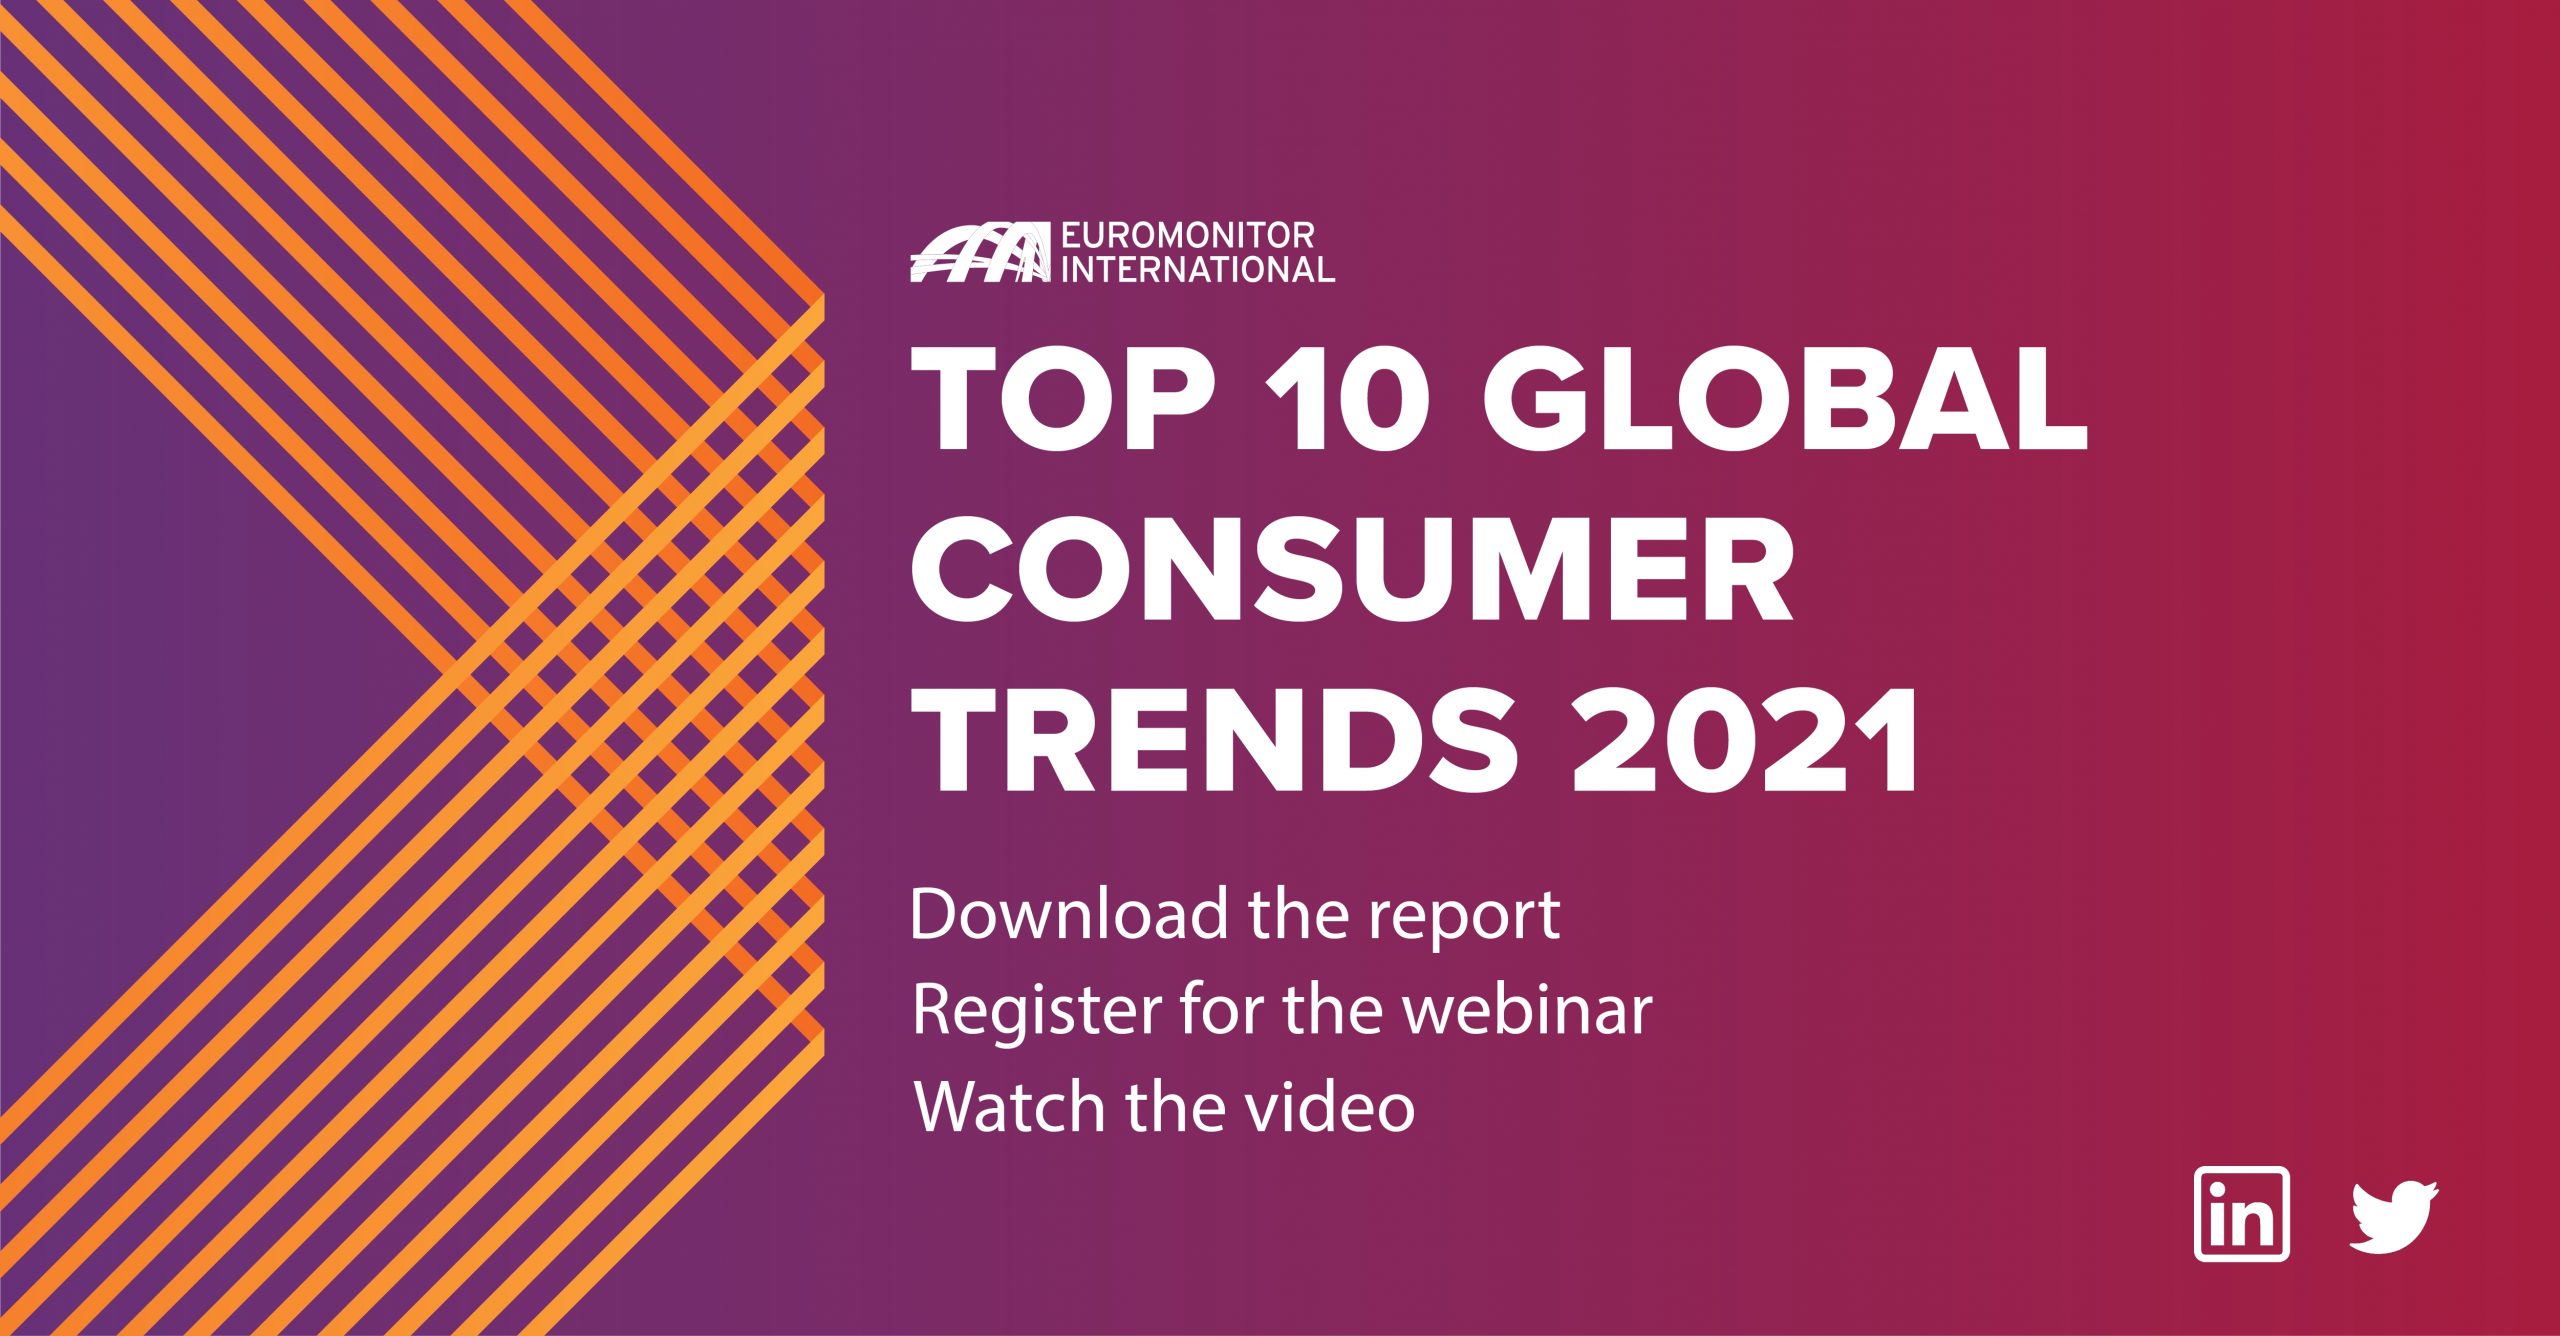 Top 10 Global Consumer Trends in 2021 | News Hub Asia